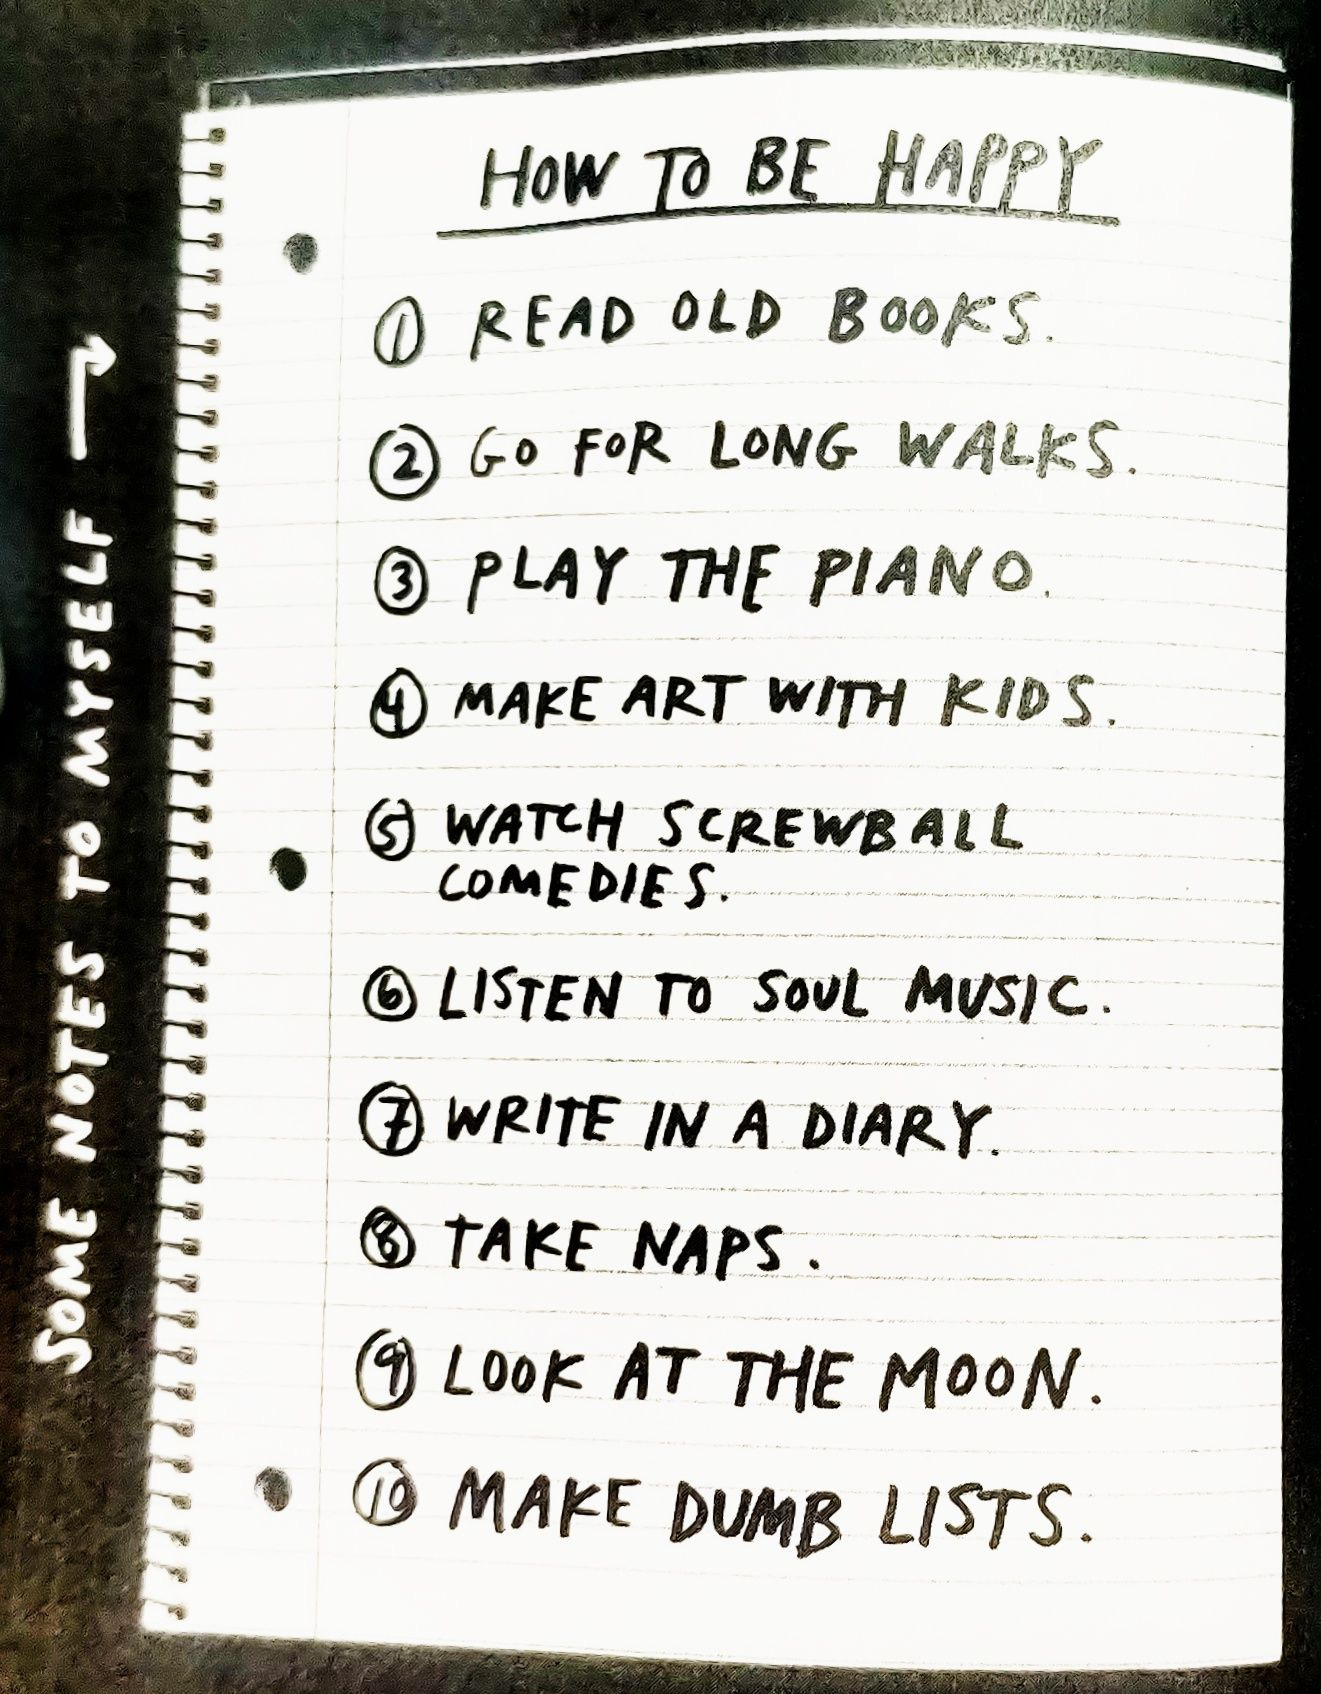 Austin's list on How to Be Happy (Source: Keep Going)